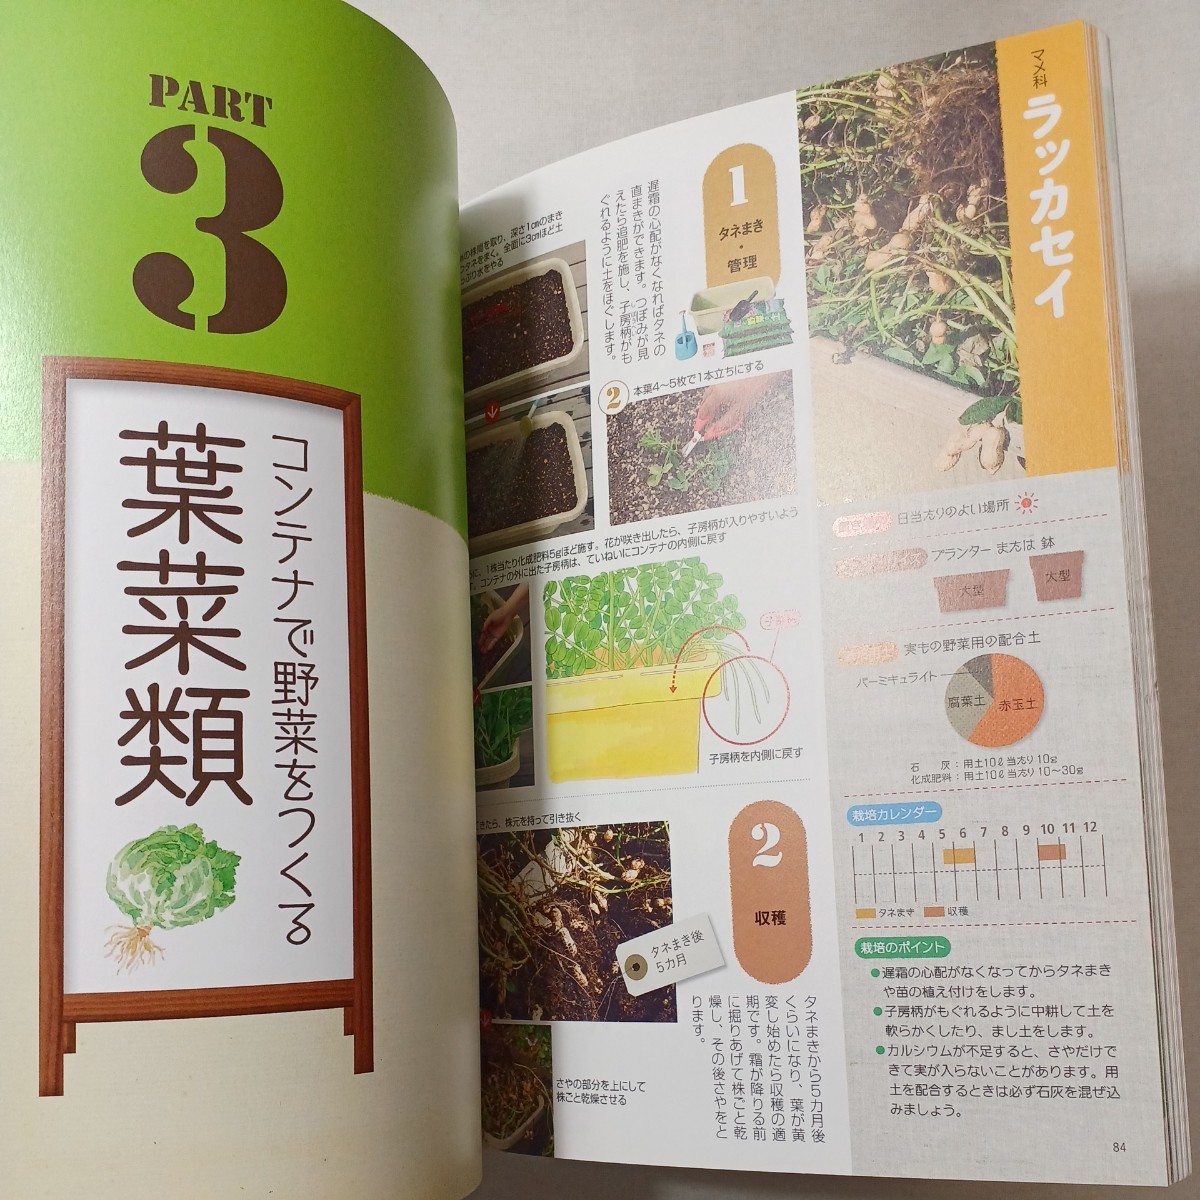 zaa-450! one annual possible to enjoy container vegetable ... gold rice field first generation [ work ]/ gold rice field . one .[ photograph ] west higashi company (2011/05 sale )